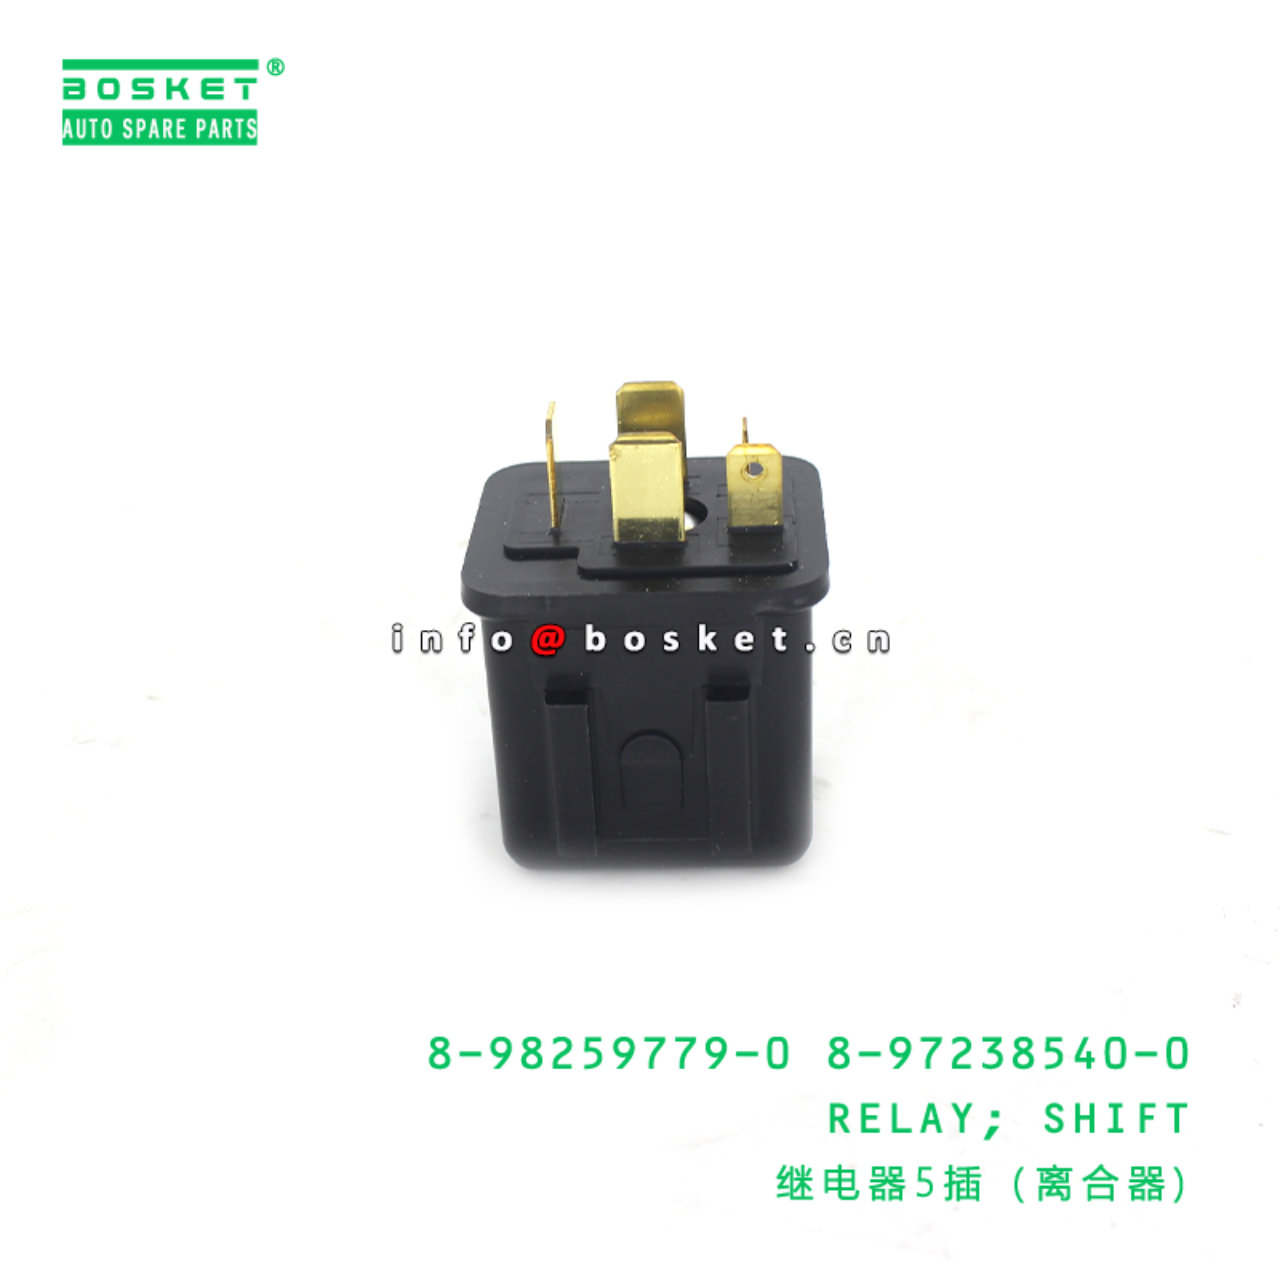 8-98259779-0 8-97238540-0 Shift Relay 8982597790 8972385400 Suitable for ISUZU 700P